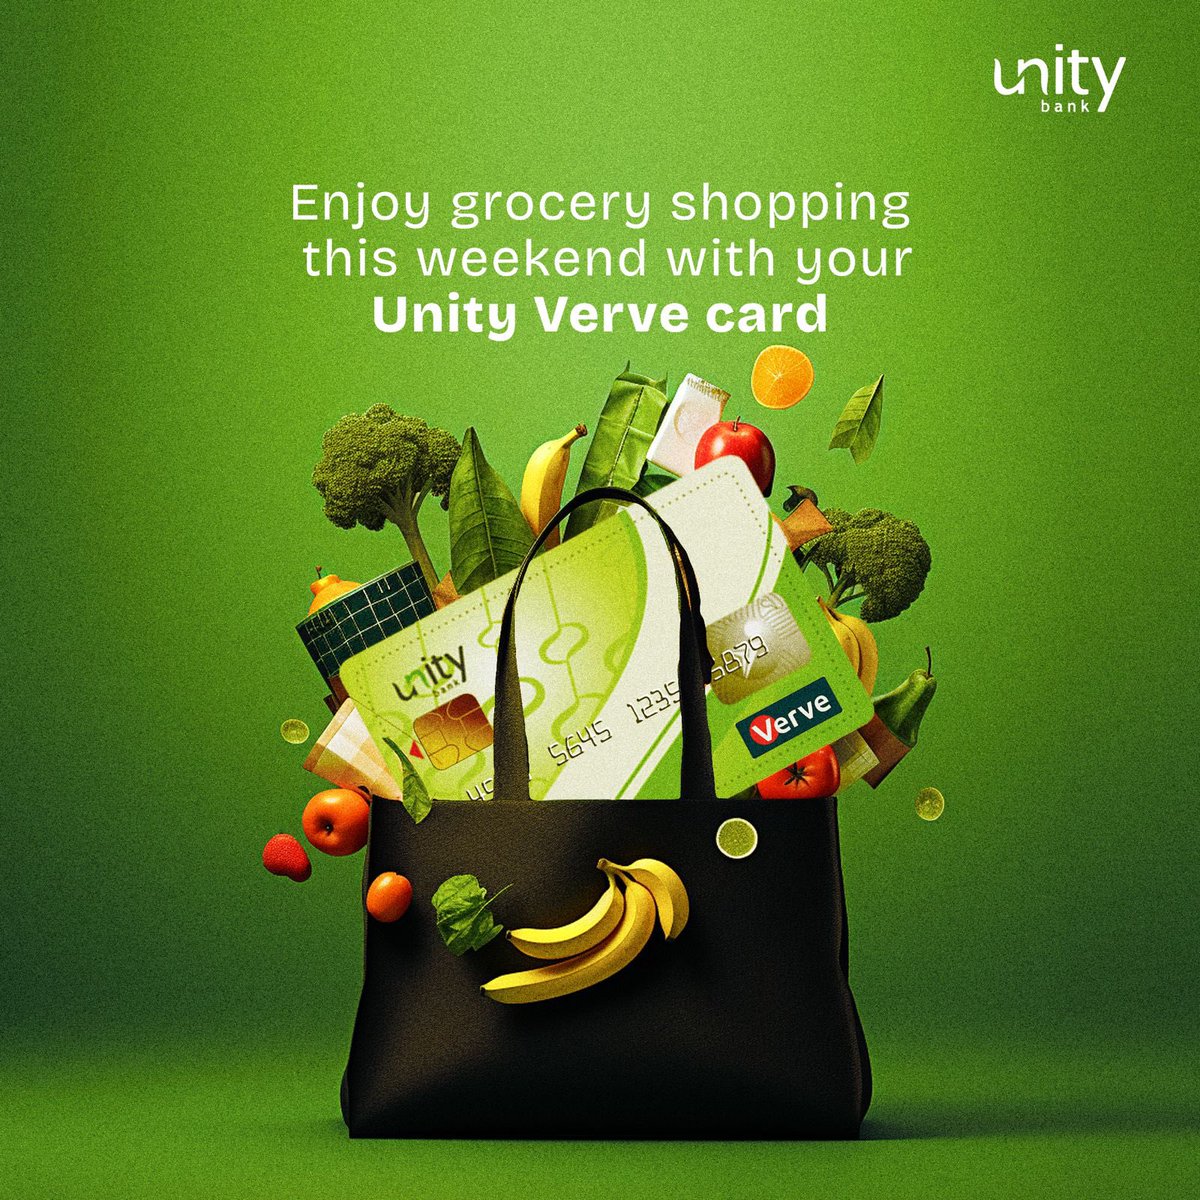 Grab your Unity Bank Verve Card and make grocery shopping seamless this weekend 💳🛒
 
 #tgif #succeedingtogether